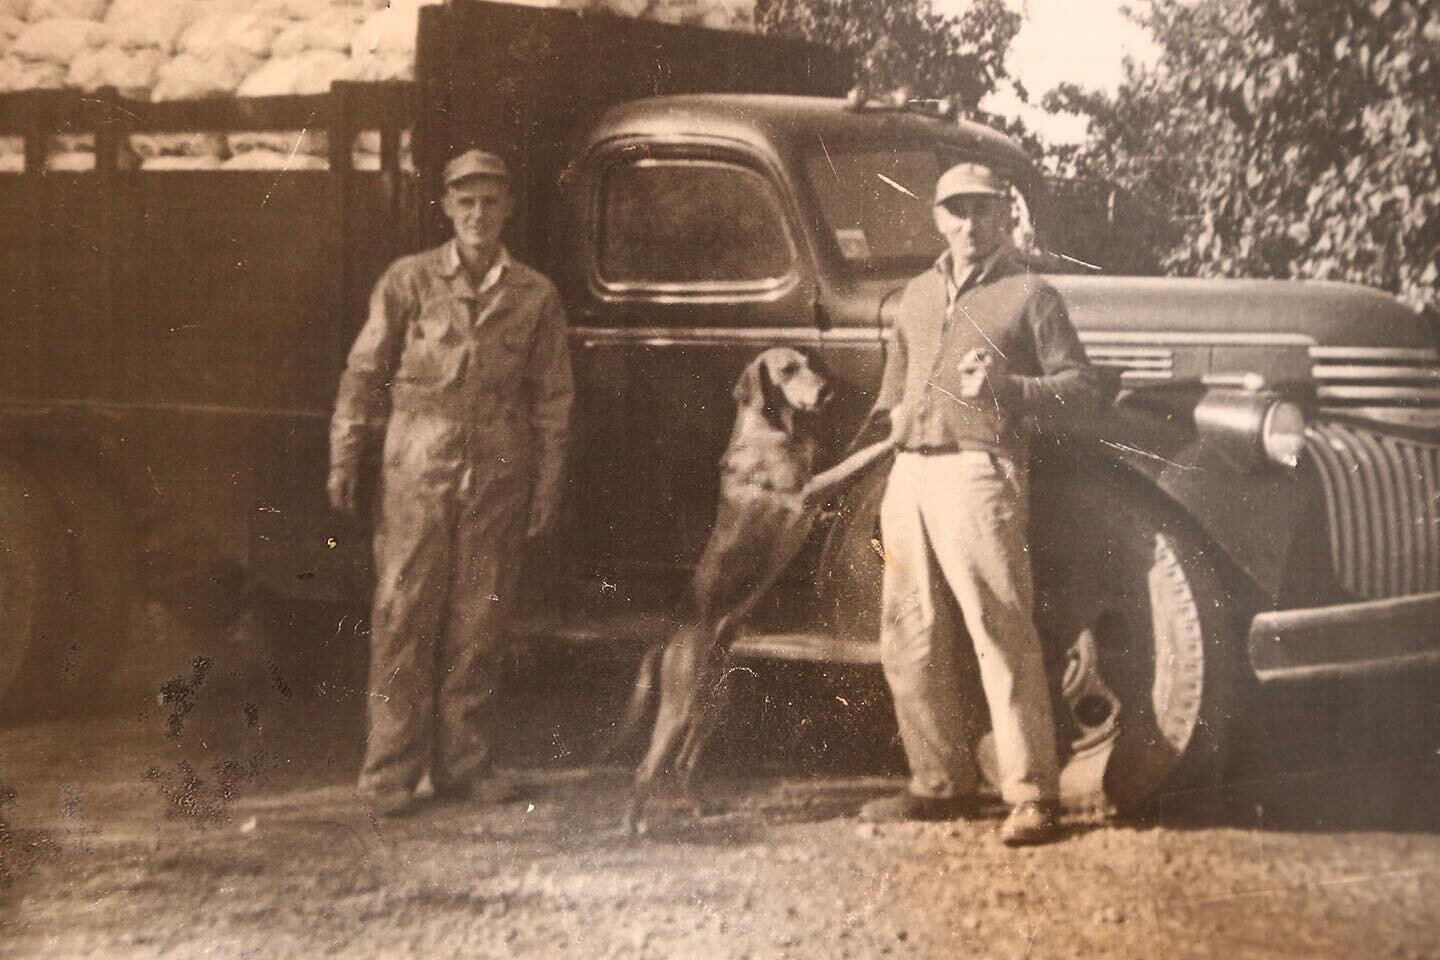 Father and son, Archie and Howard Post, have the truck loaded and ready to head into Erie to deliver potatoes. We aren&rsquo;t exactly sure when this picture was taken but it was a very long time ago. Archie and Howard are 2nd and 3rd generation farm